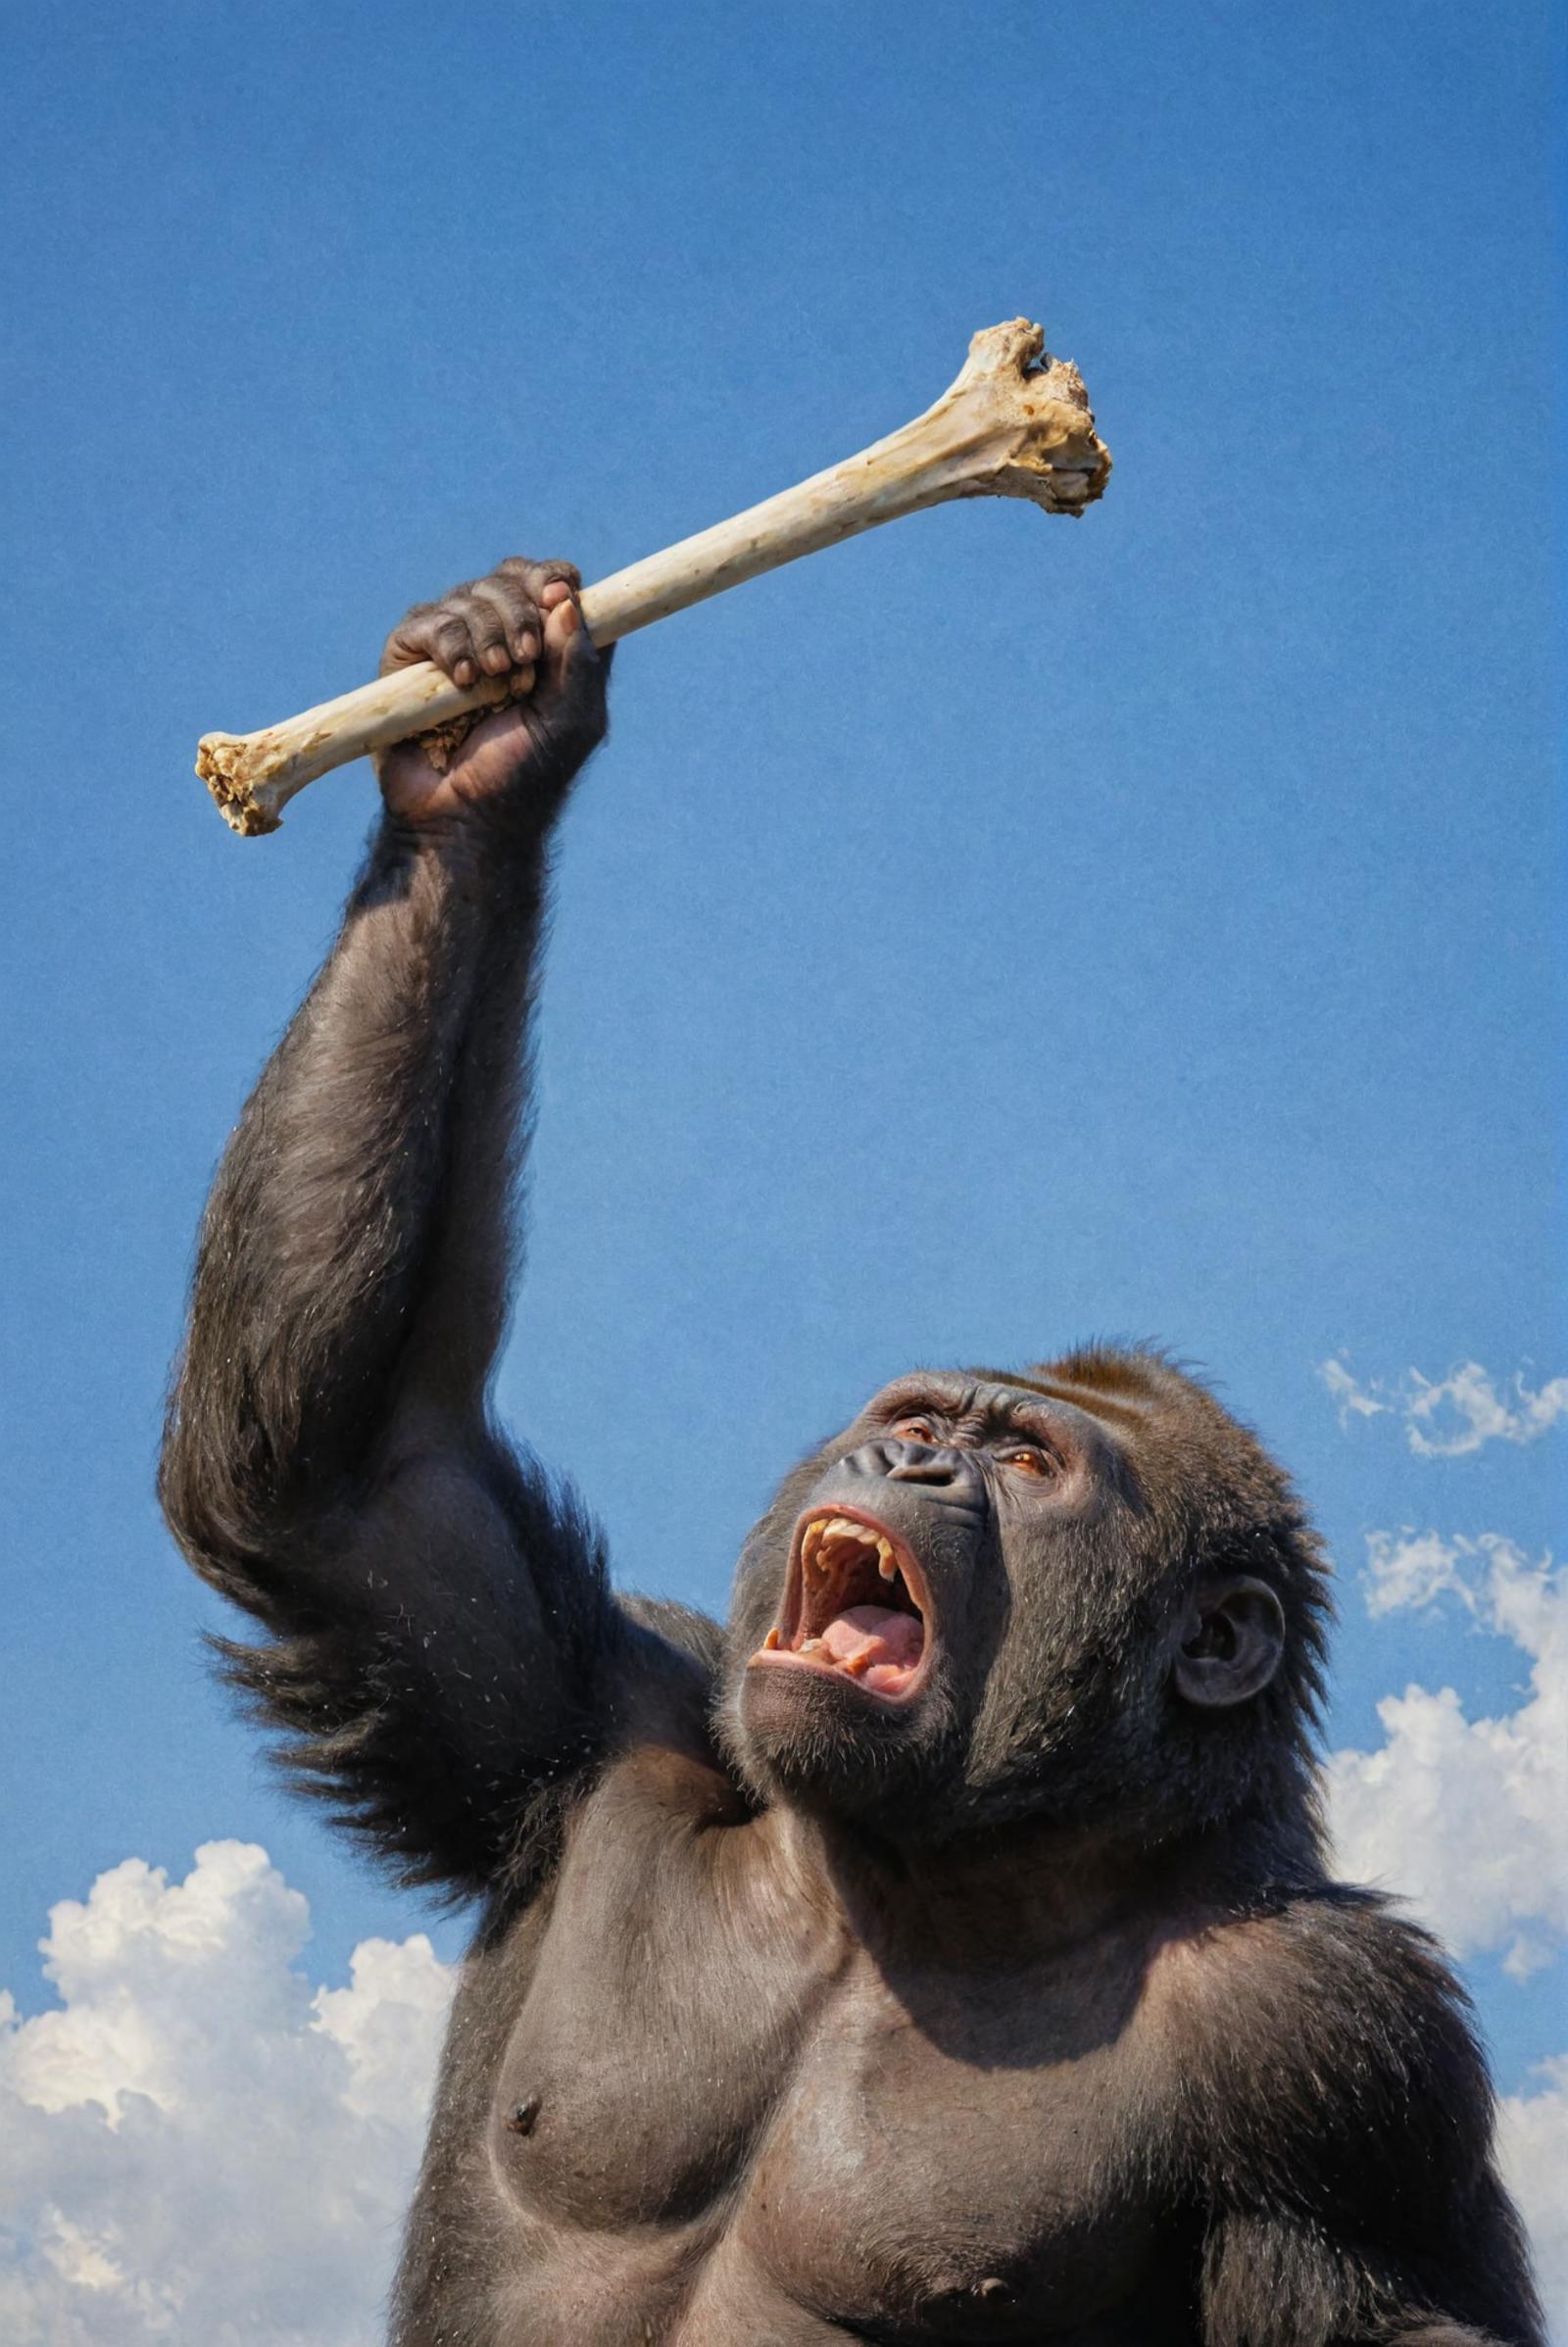 A gorilla with its mouth open holding a bone in its hand.